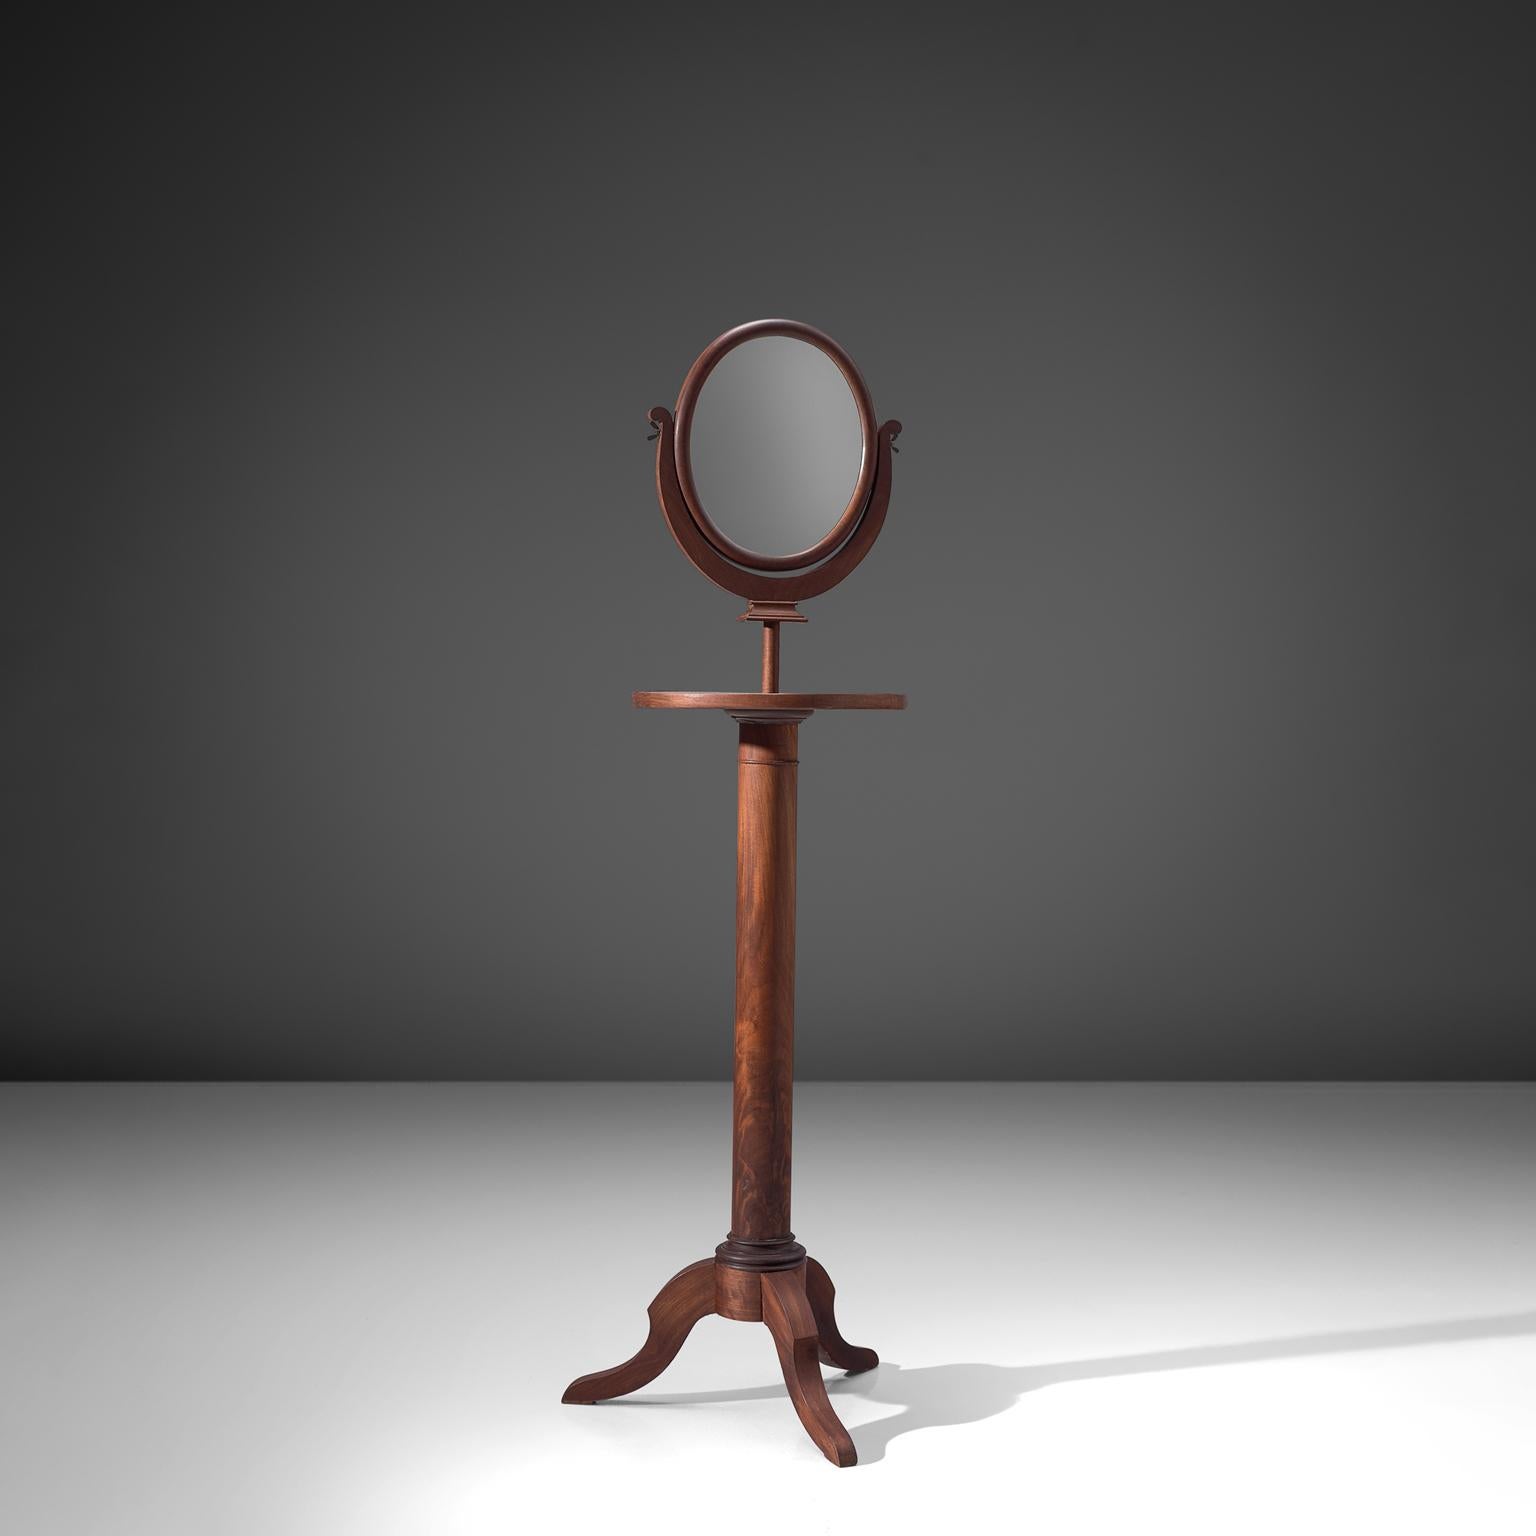 Mirror, walnut, glass, Italy, 1940s

This freestanding mirror is executed in walnut. It has an oval mirror, placed on a pedestal base with three legs. The height and angle of this mirror is easily adjustable to a height of 182 cm. It can be placed